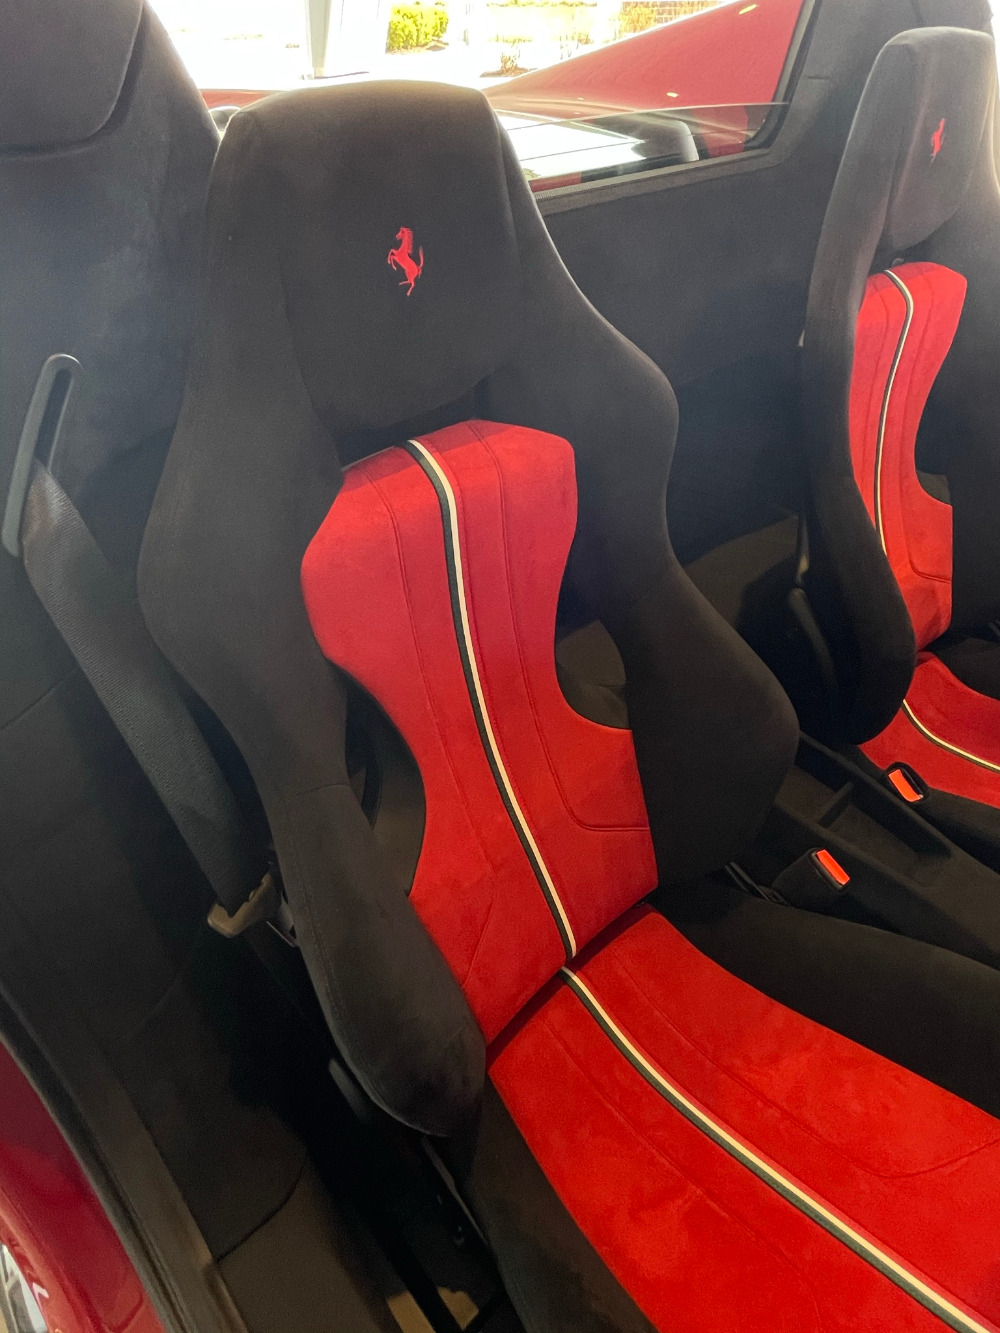 Used 2020 Ferrari 488 Pista Spider Used 2020 Ferrari 488 Pista Spider for sale Sold at Cauley Ferrari in West Bloomfield MI 45